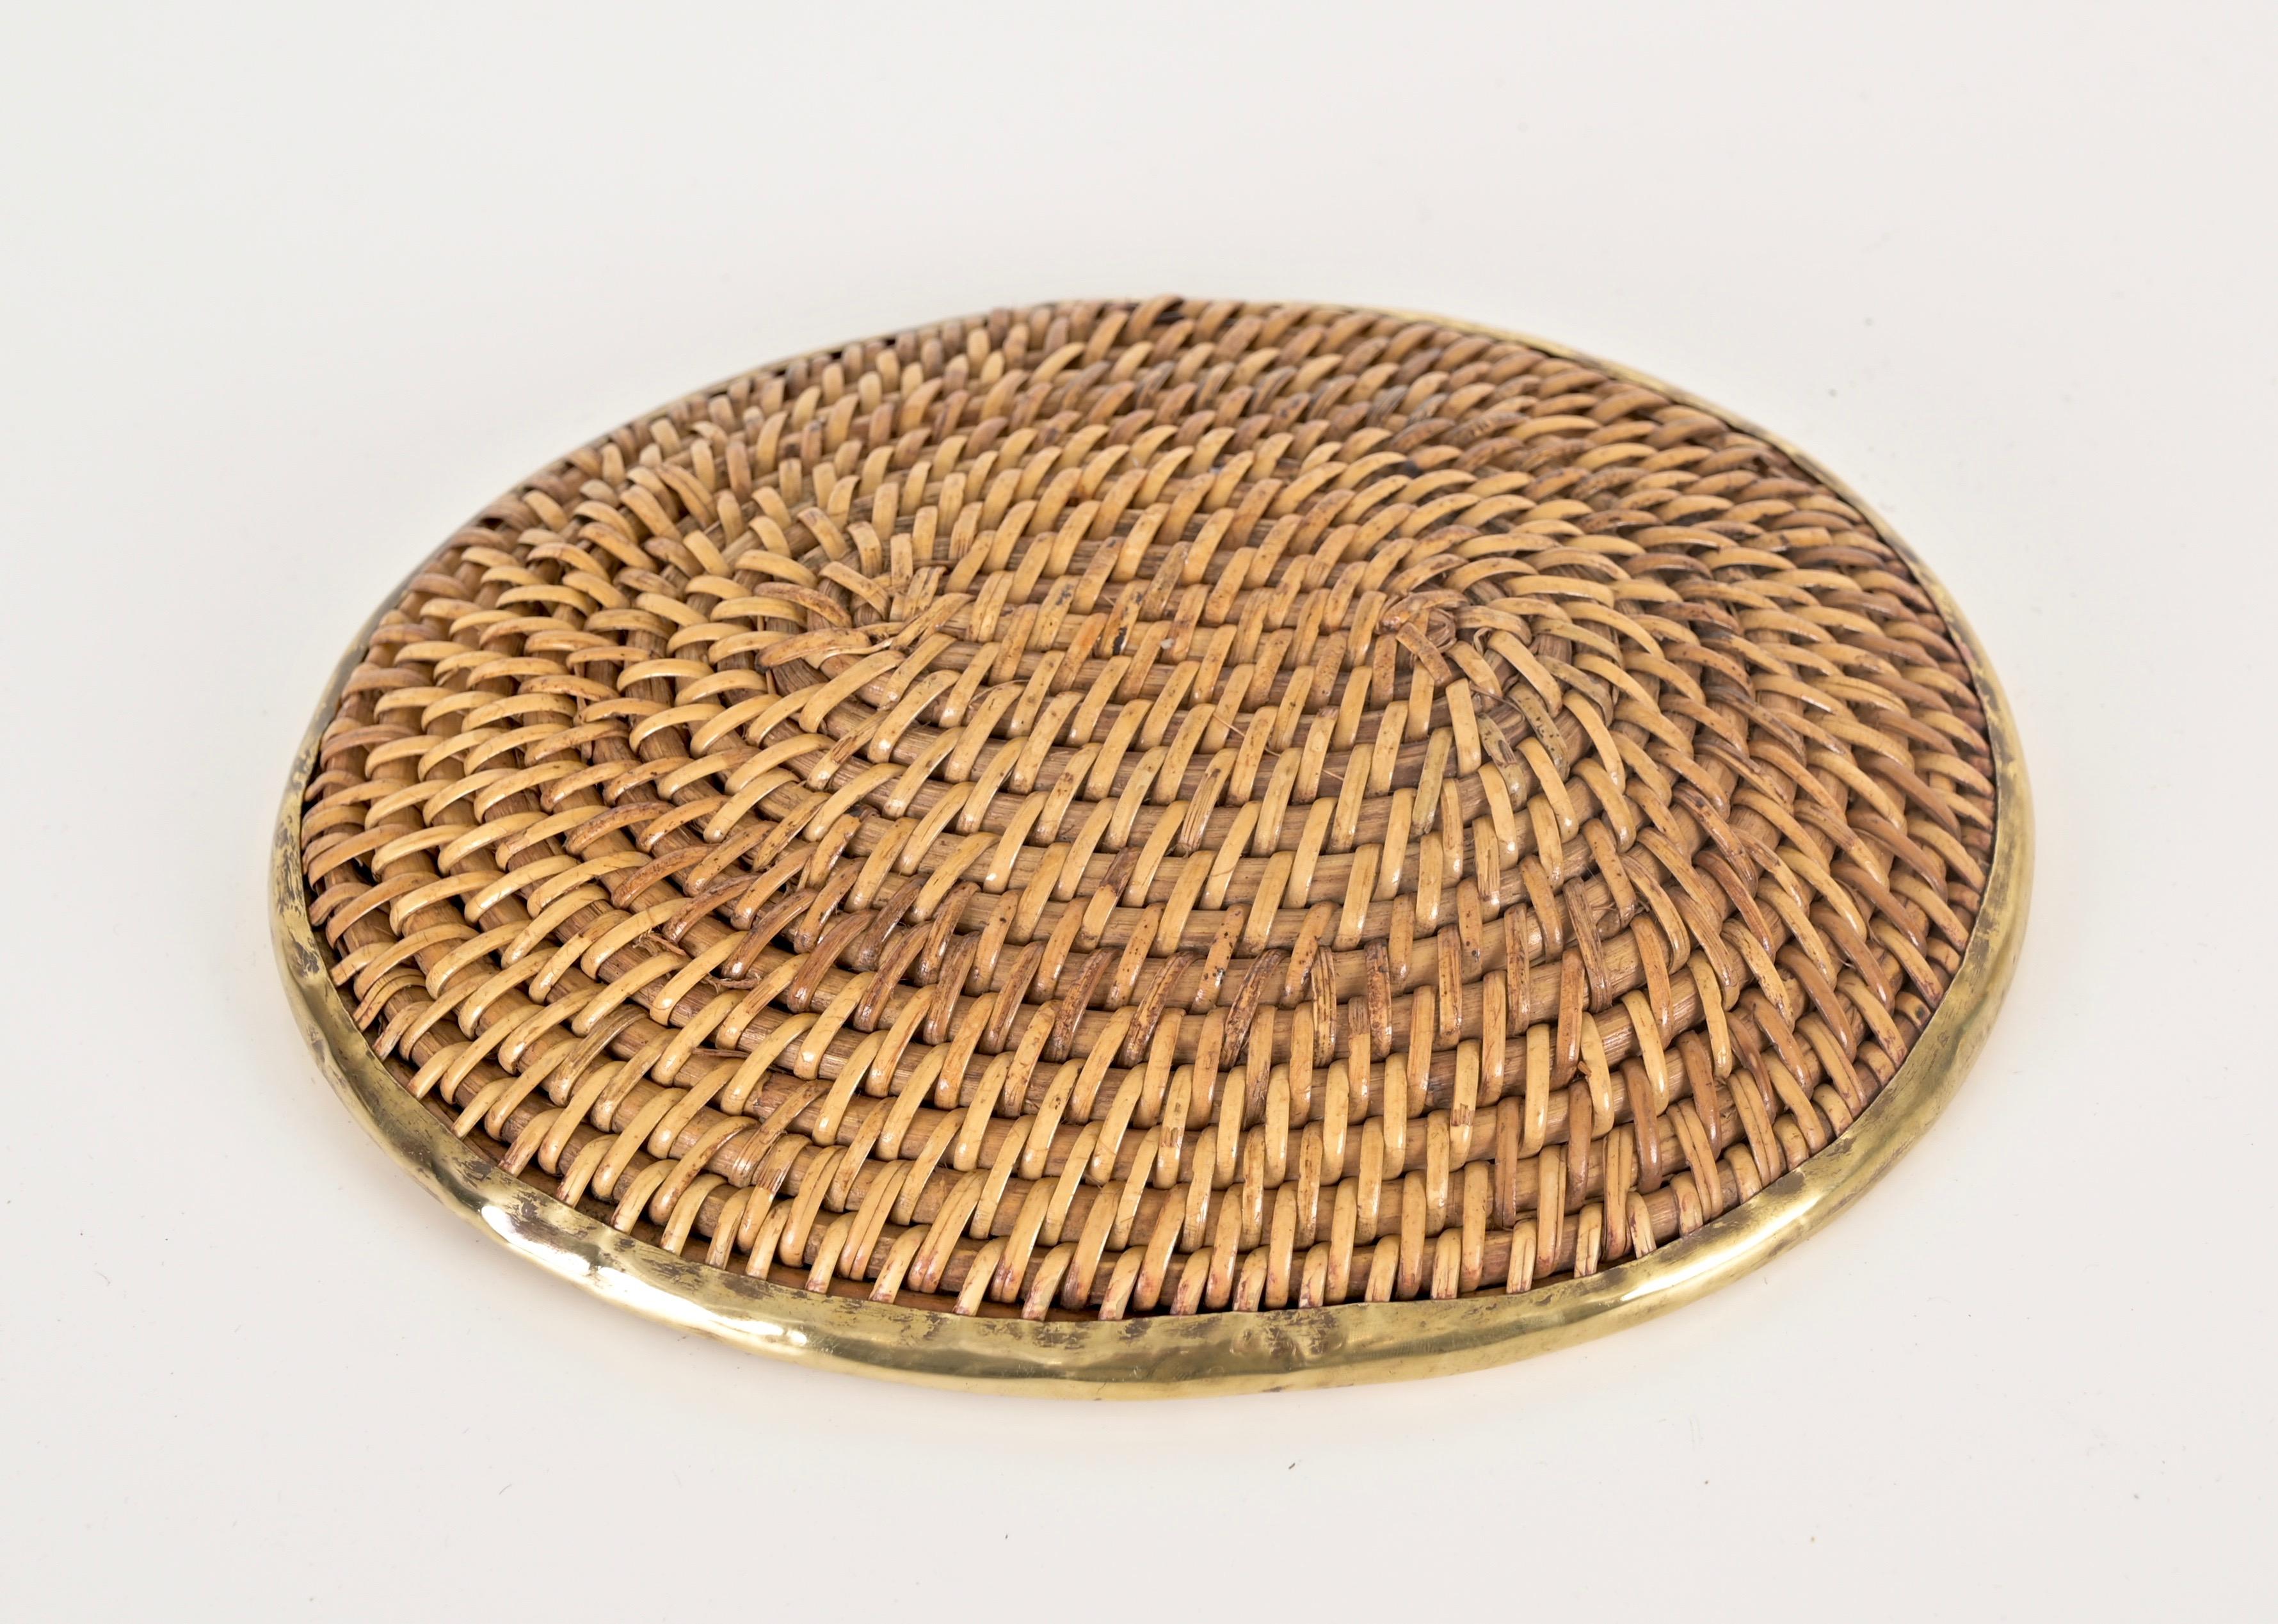 French Riviera Vide-Poche Bowl Tray in Woven Rattan and Brass, Italy 1970s For Sale 2